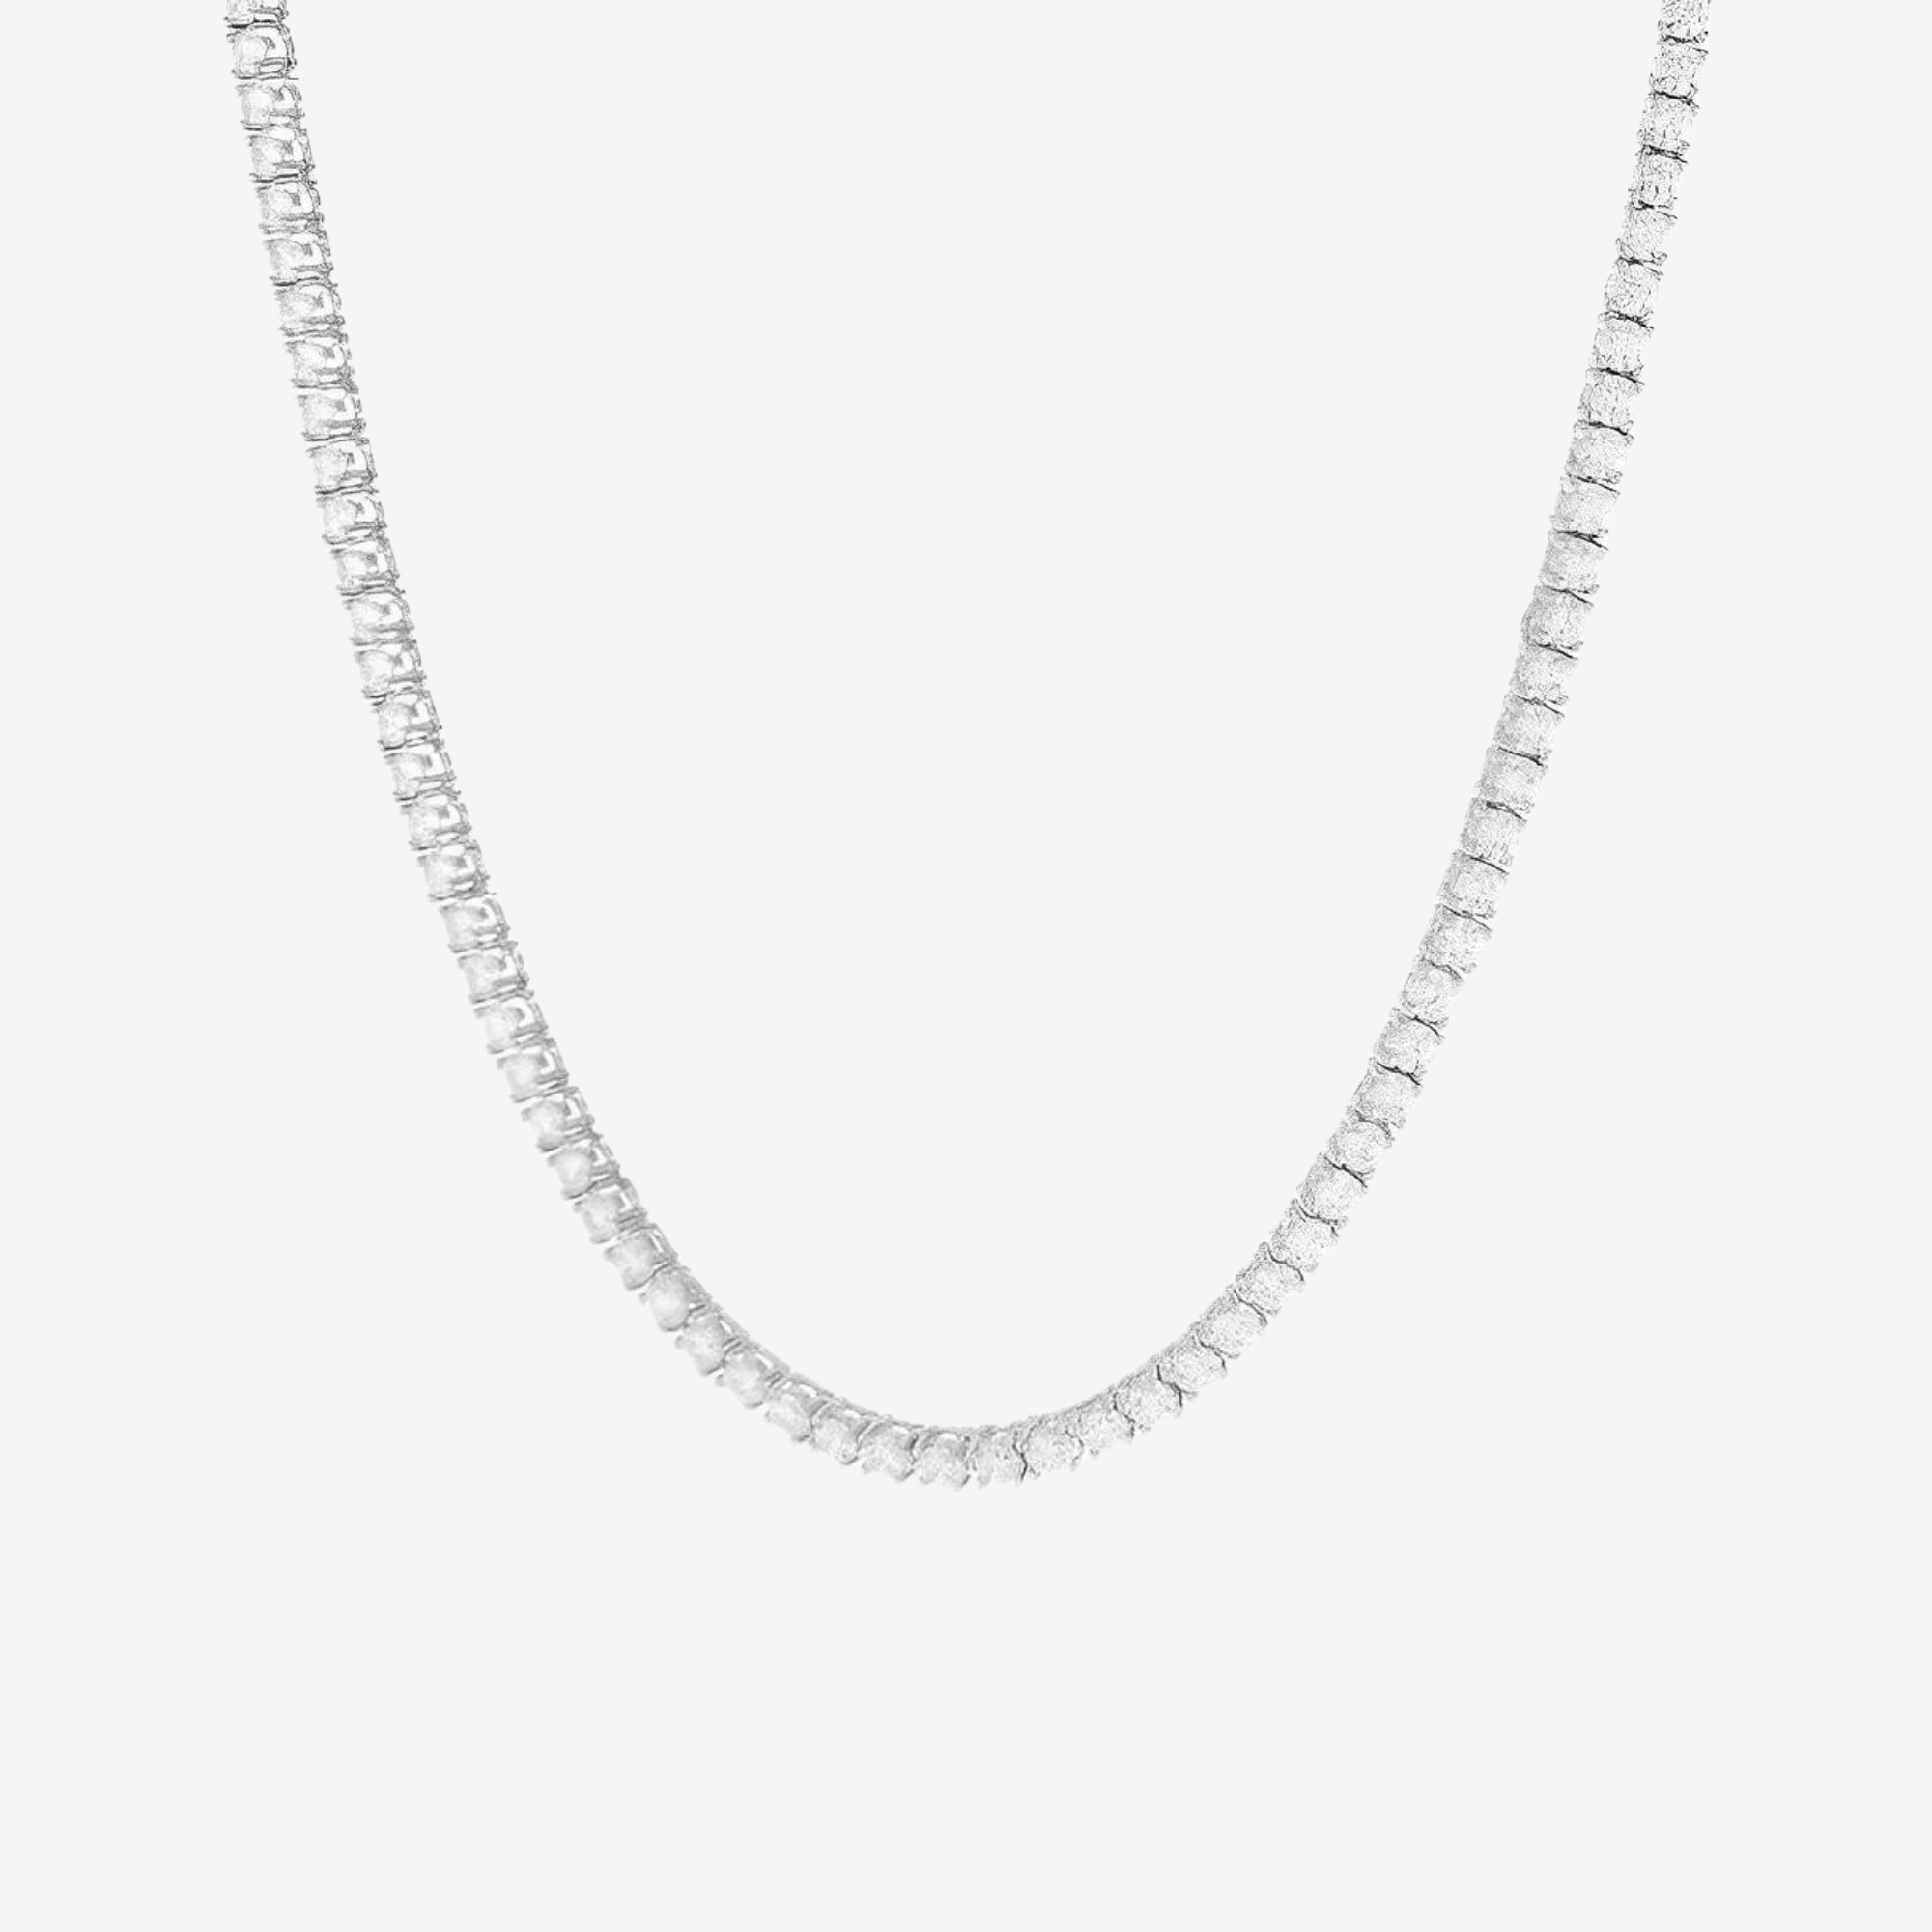 Hillenic Silver Tennis Necklace